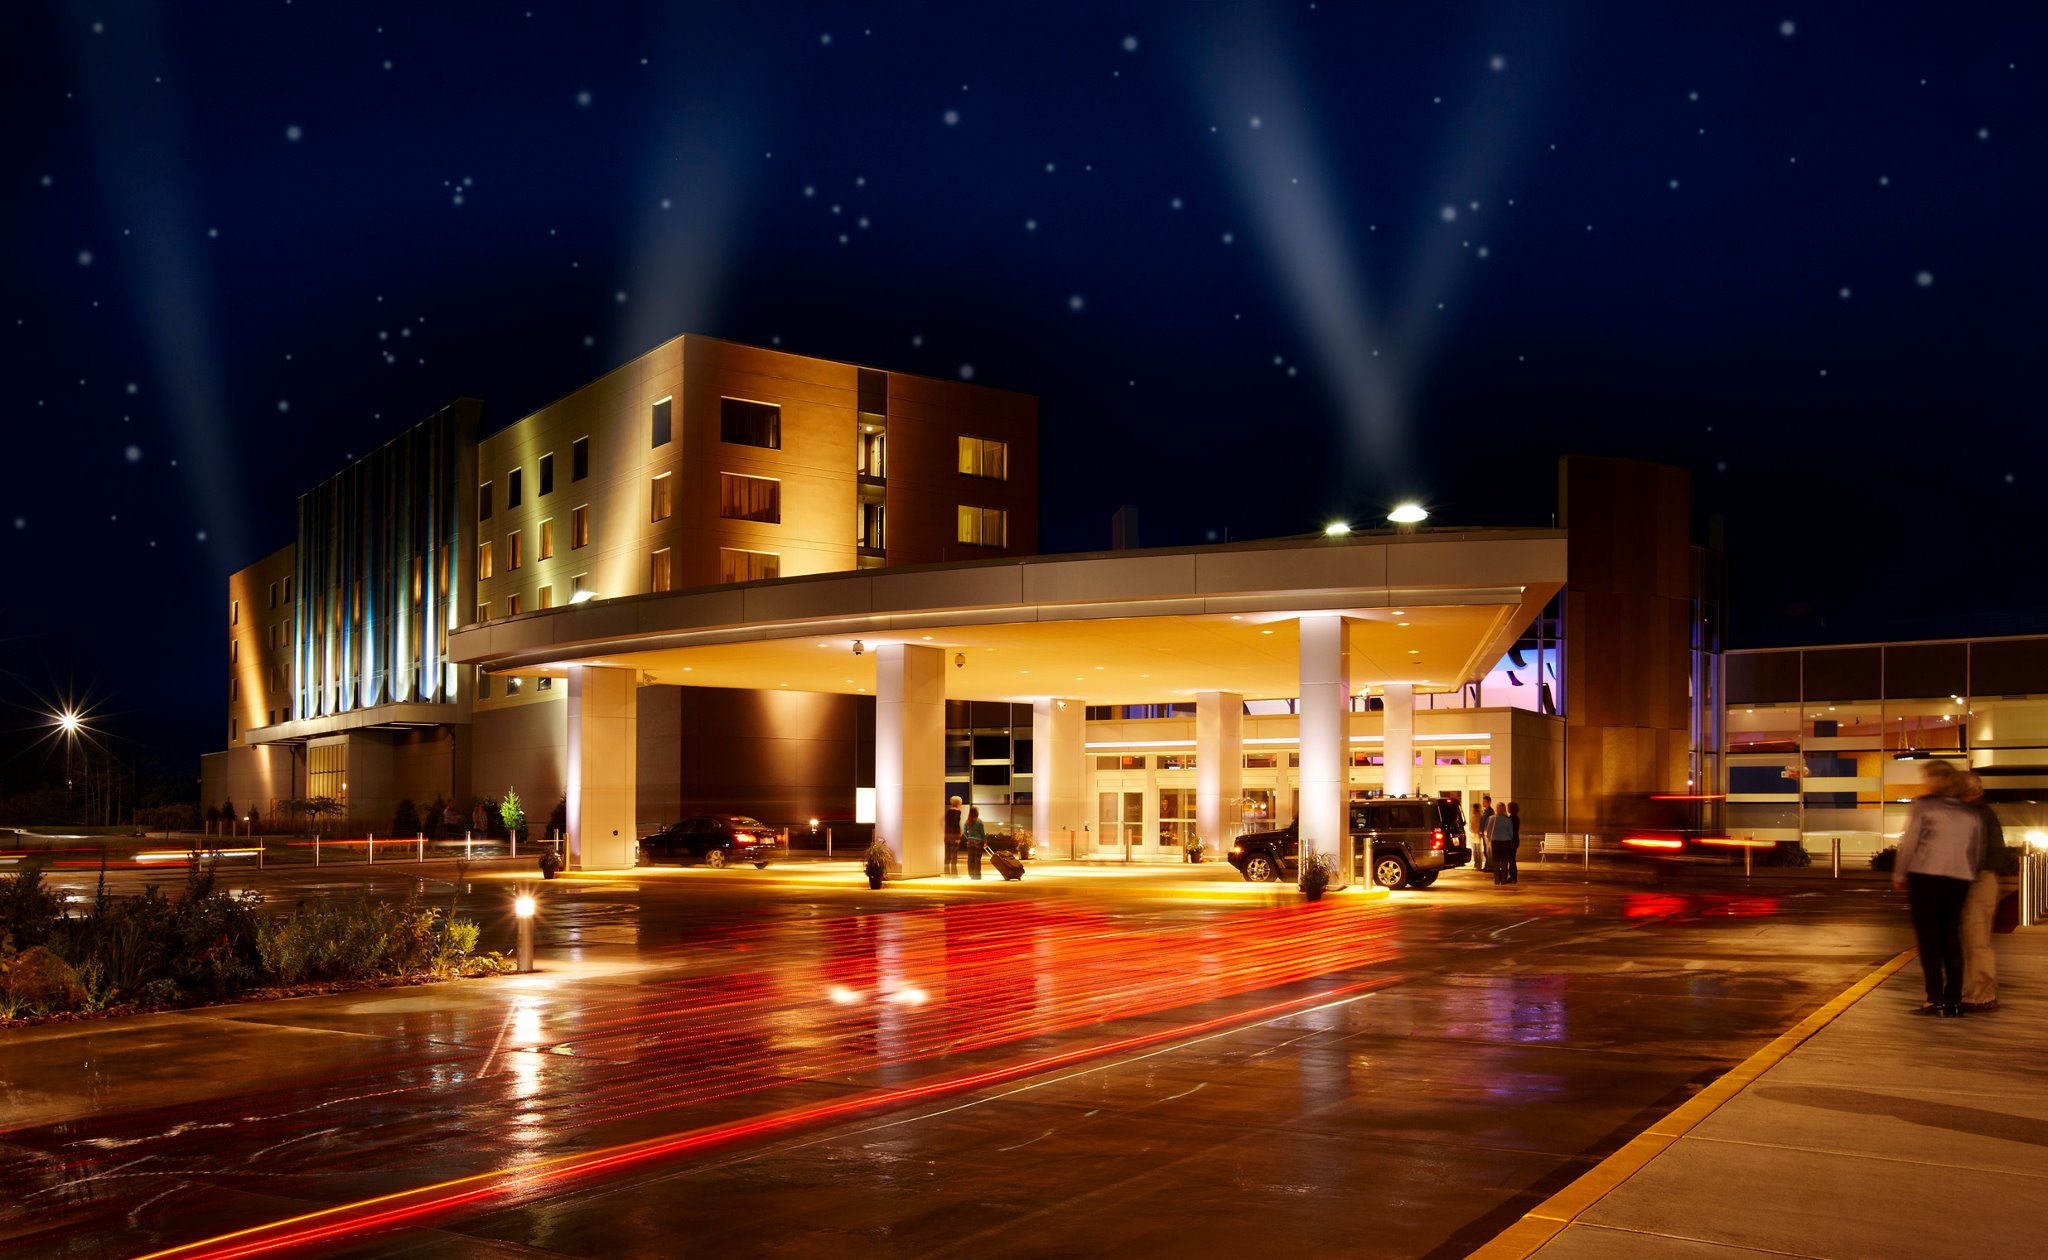 North Star Mohican Casino and Resort